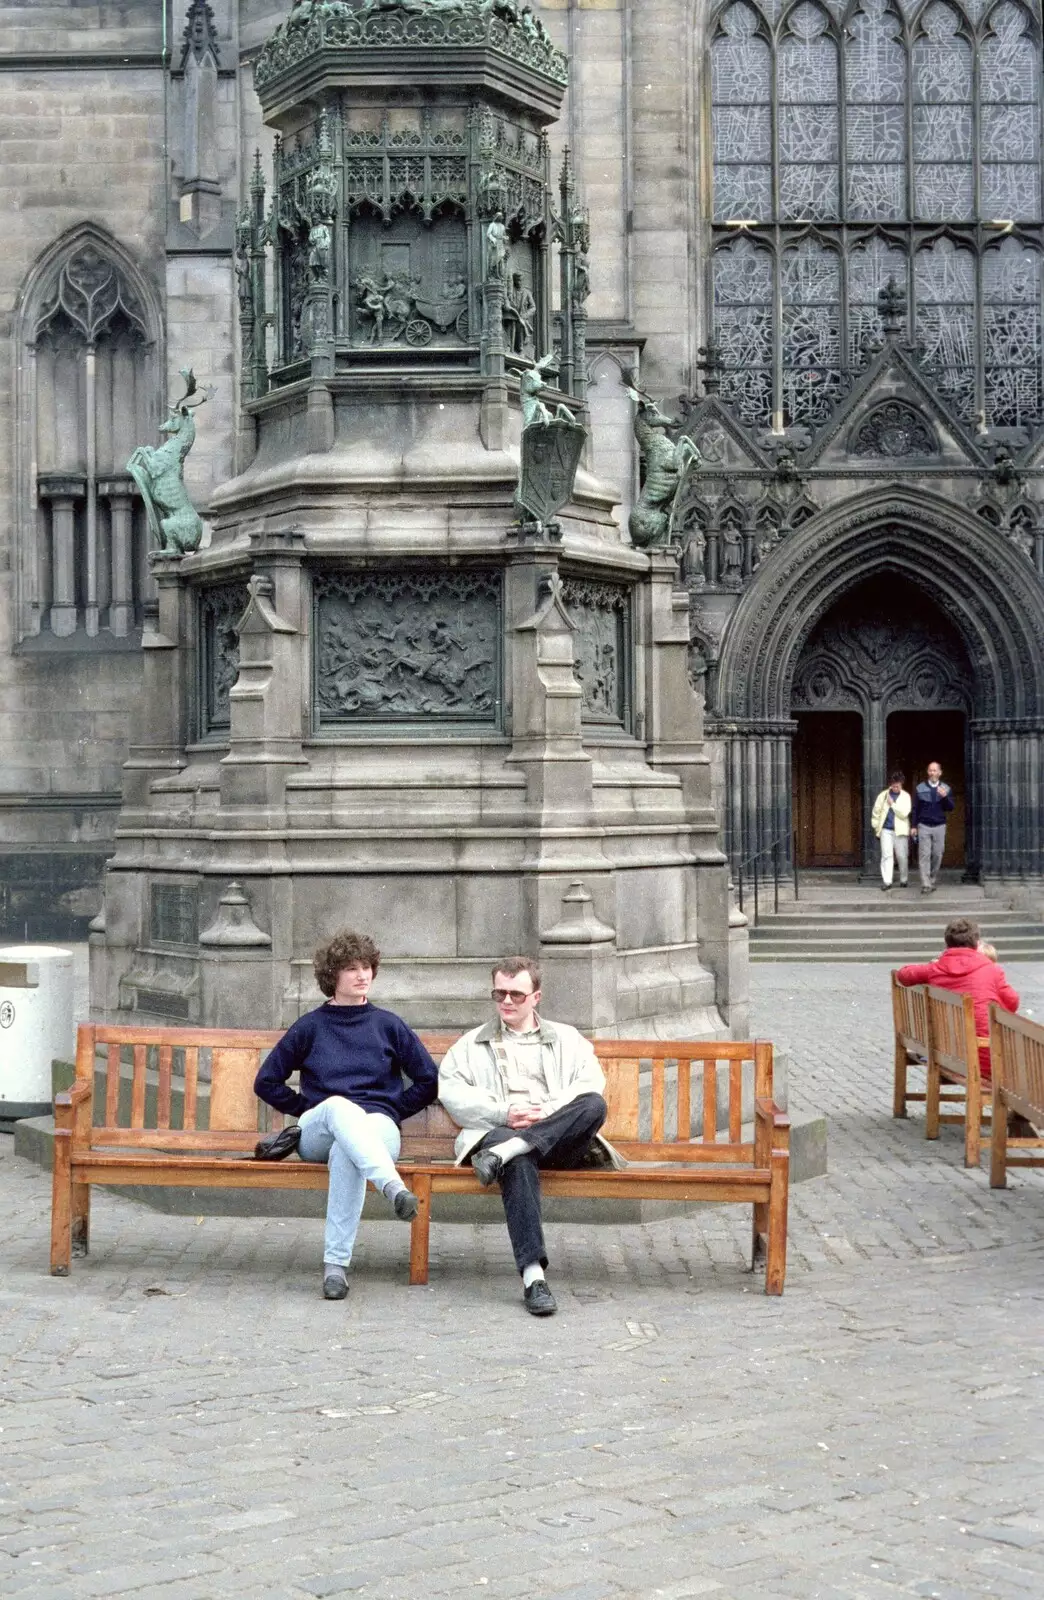 Angela and Hamish sit on a bench, from Uni: A Trip To Glasgow and Edinburgh, Scotland - 15th May 1989